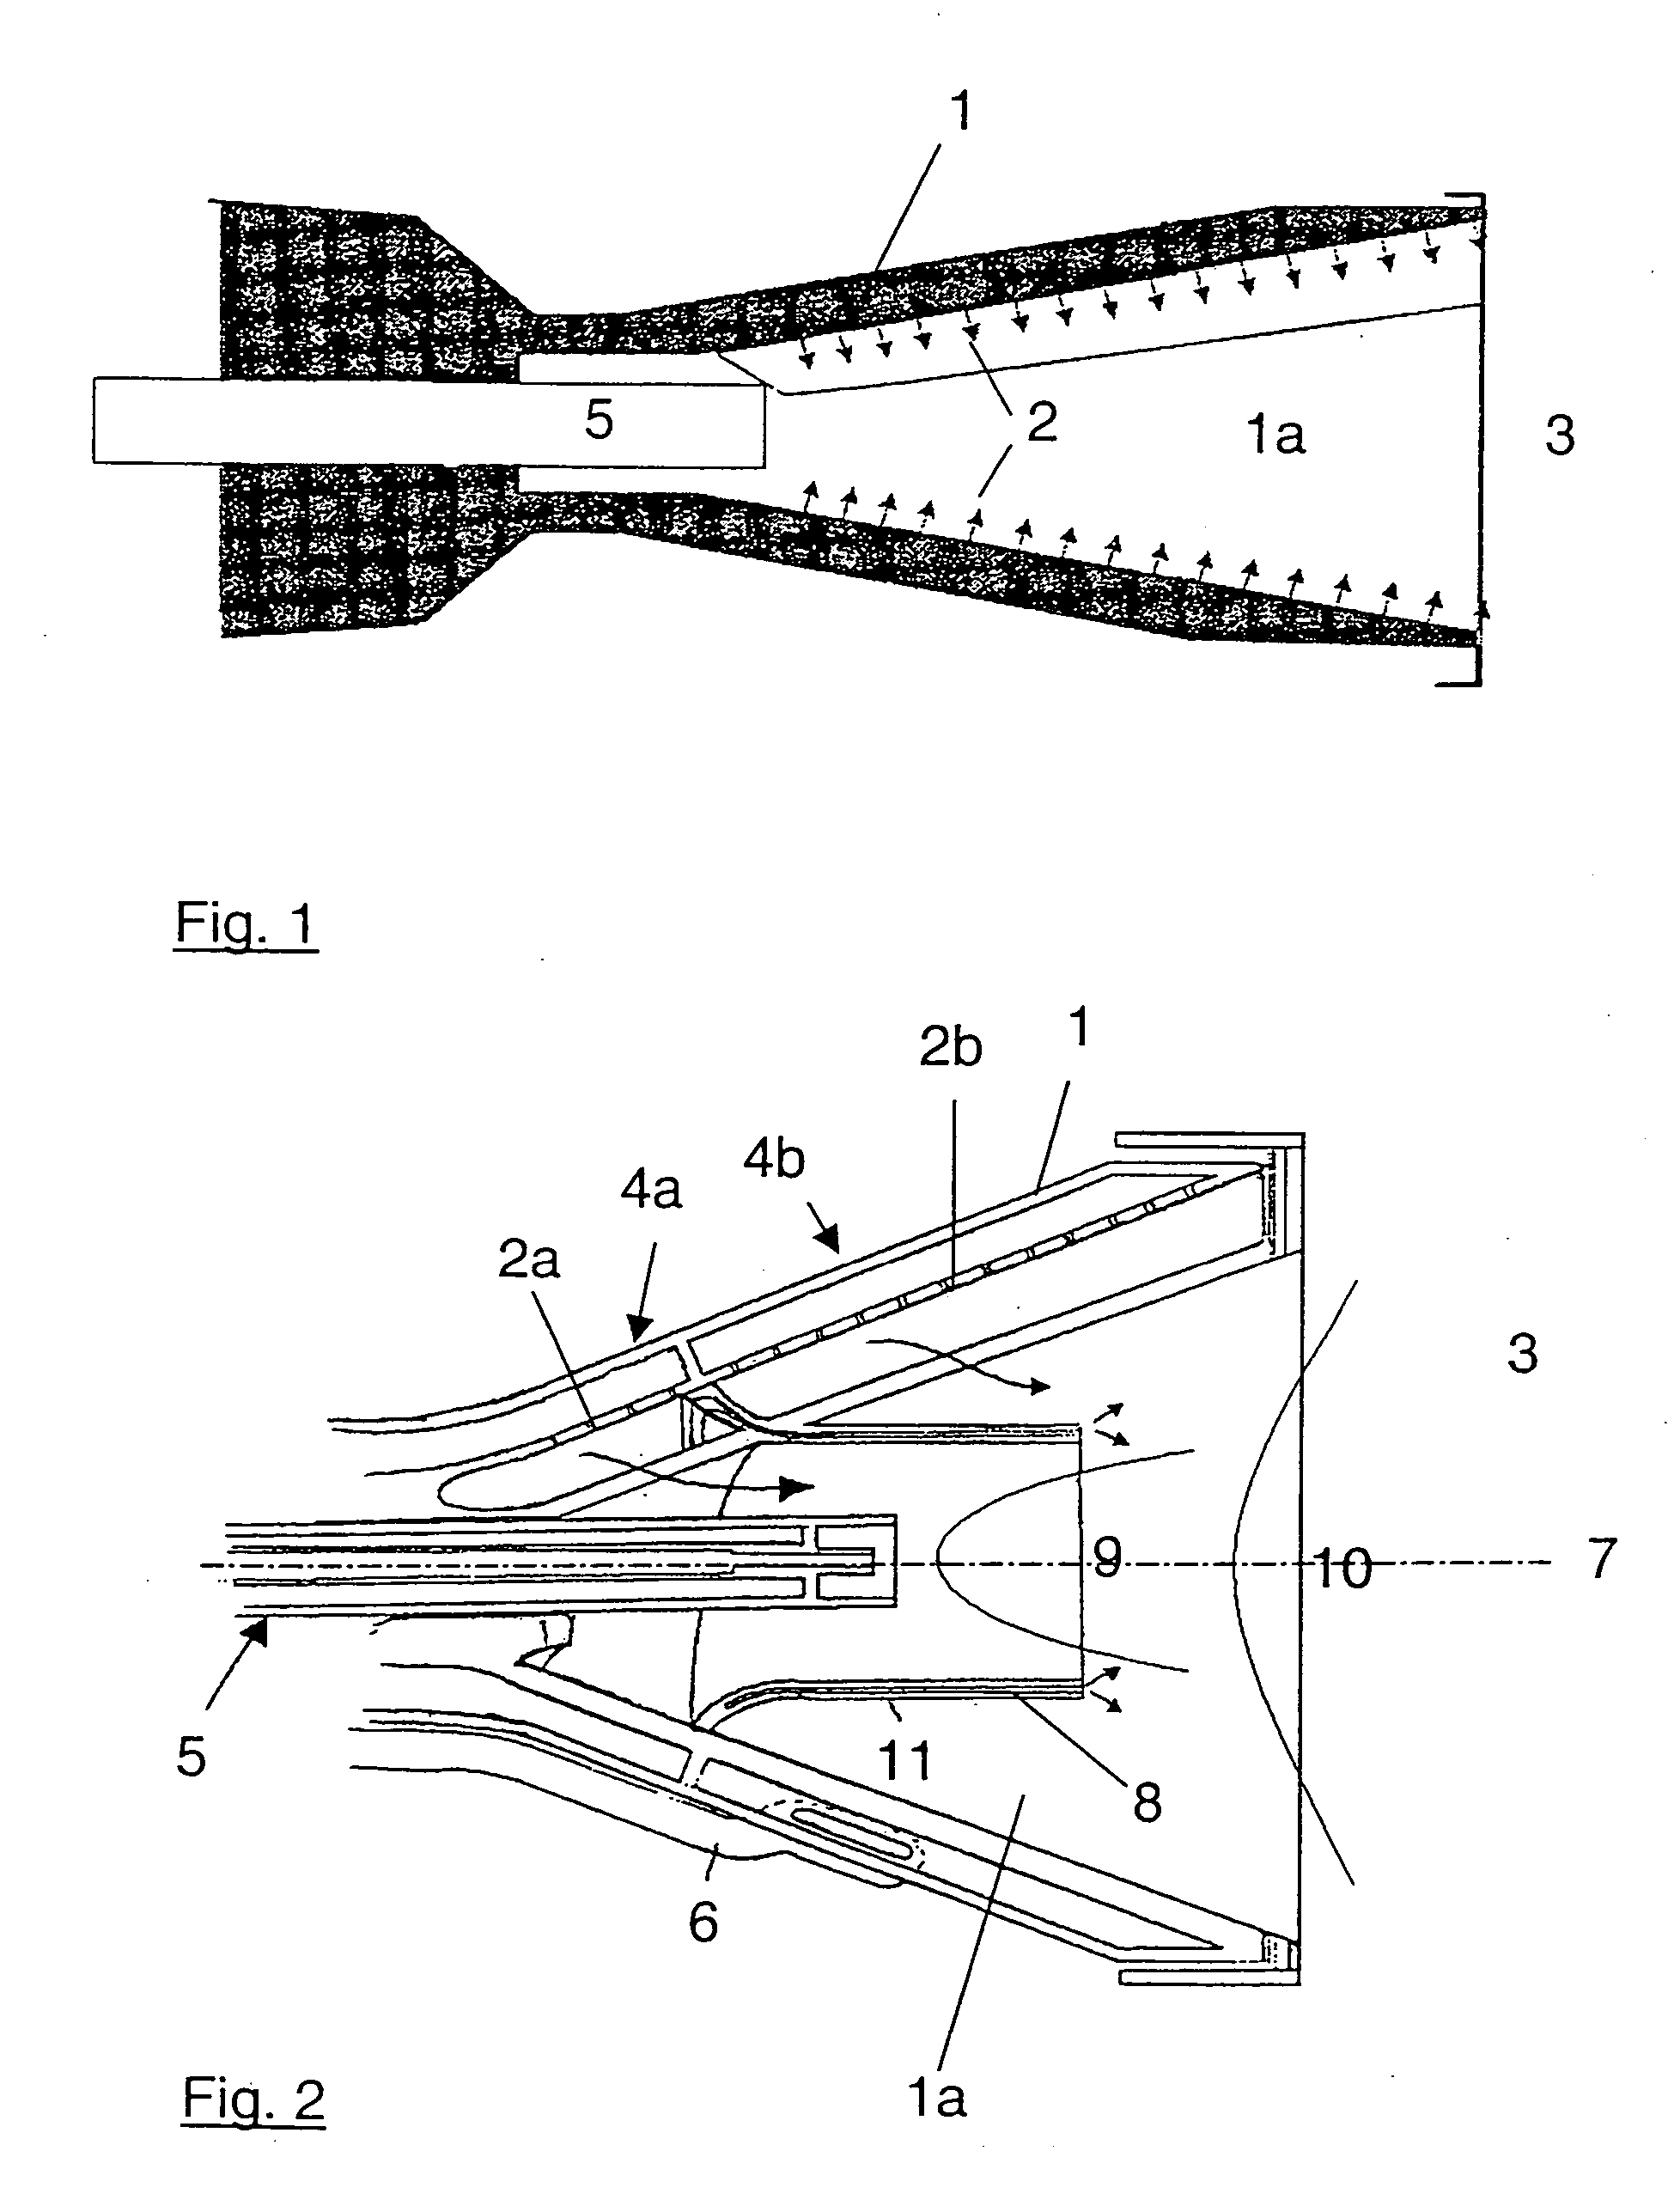 Burner with staged fuel injection